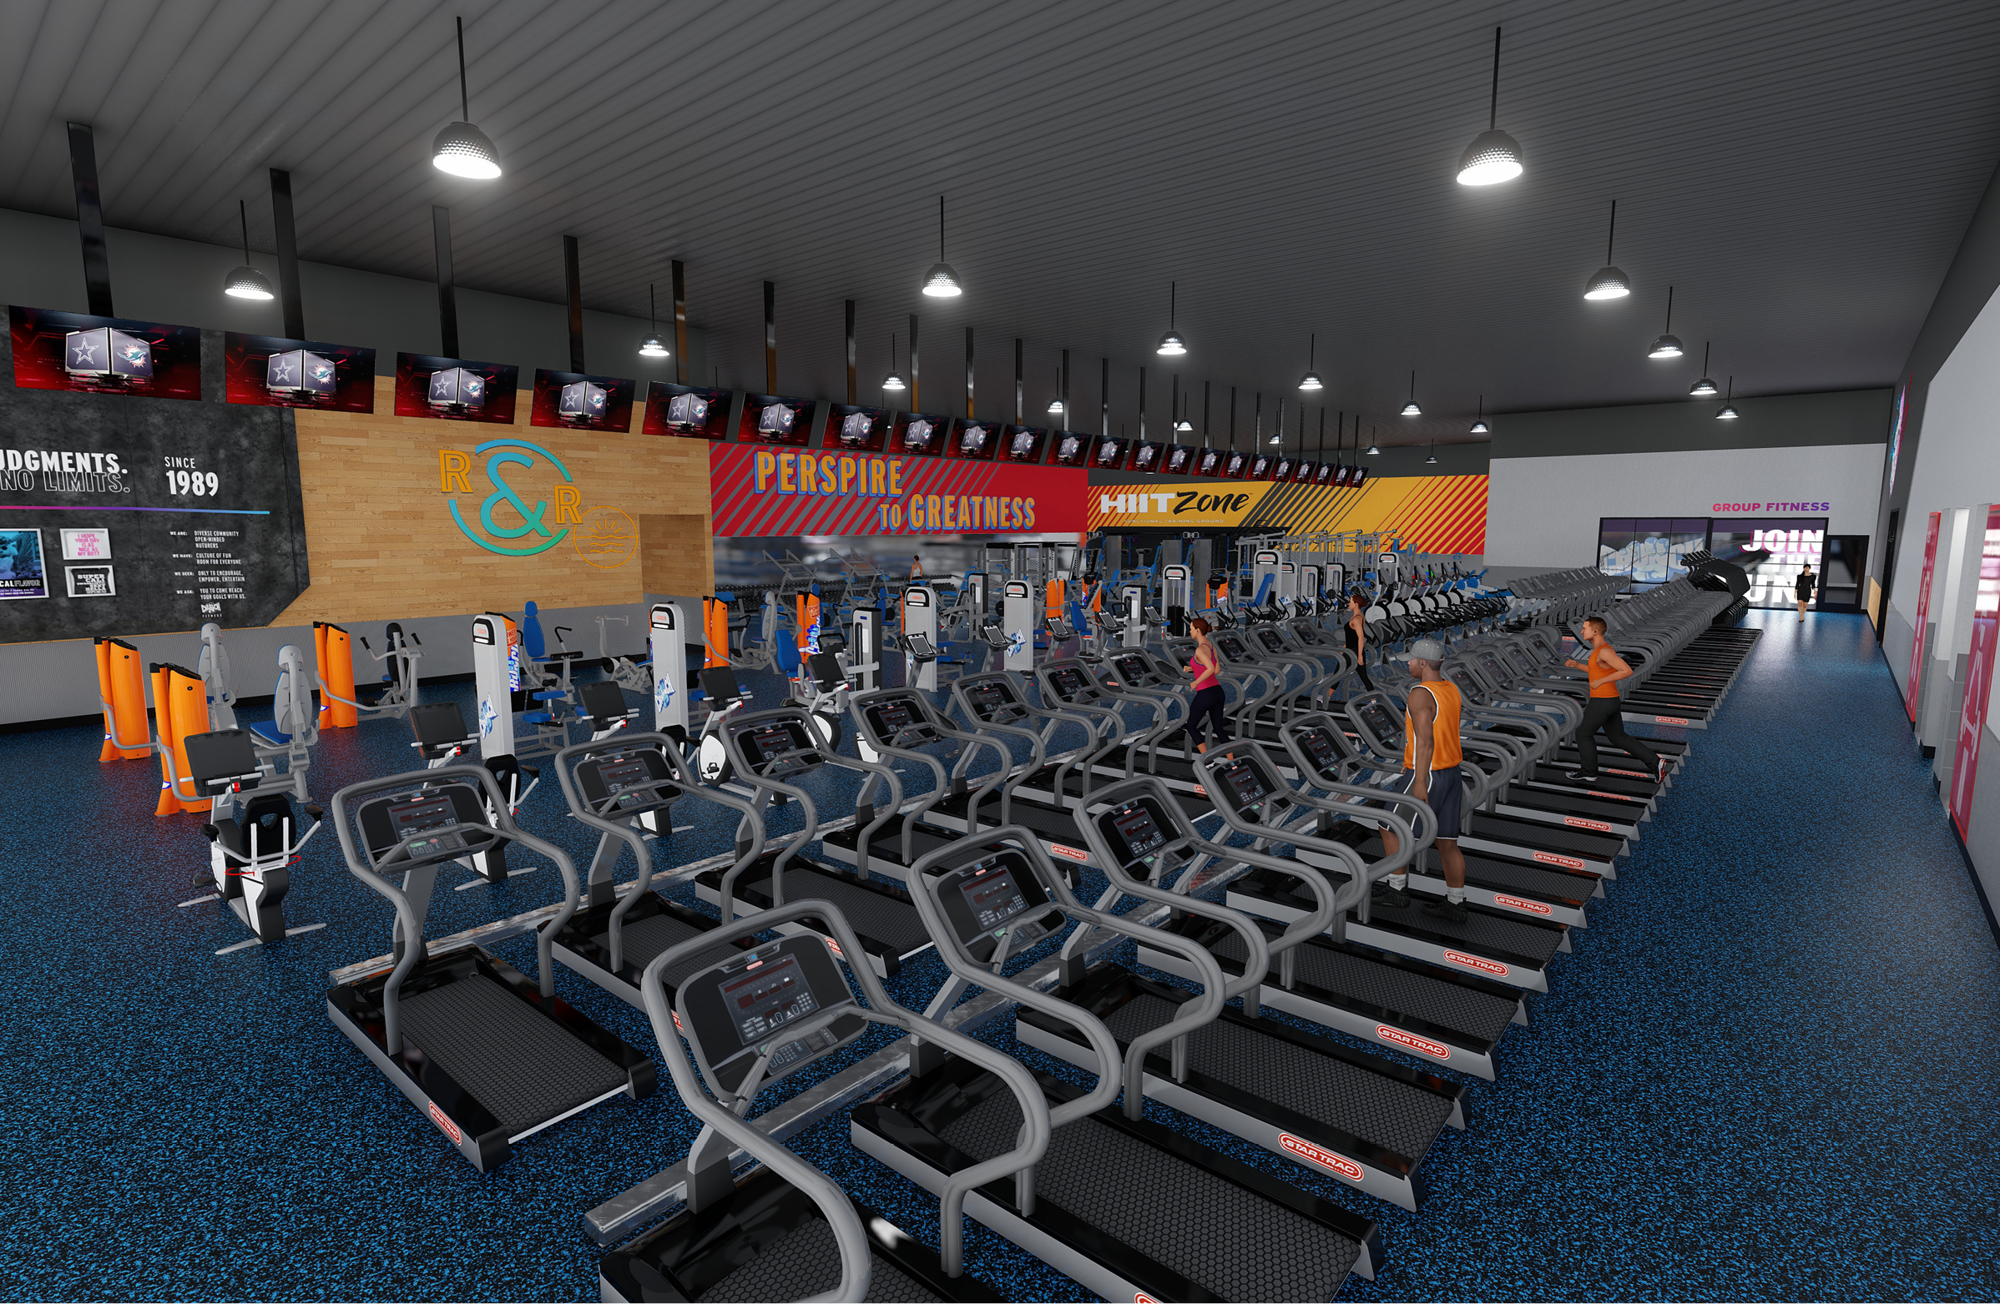 Crunch Fitness has more than 24 clubs in Florida, including a location in Orange Park.